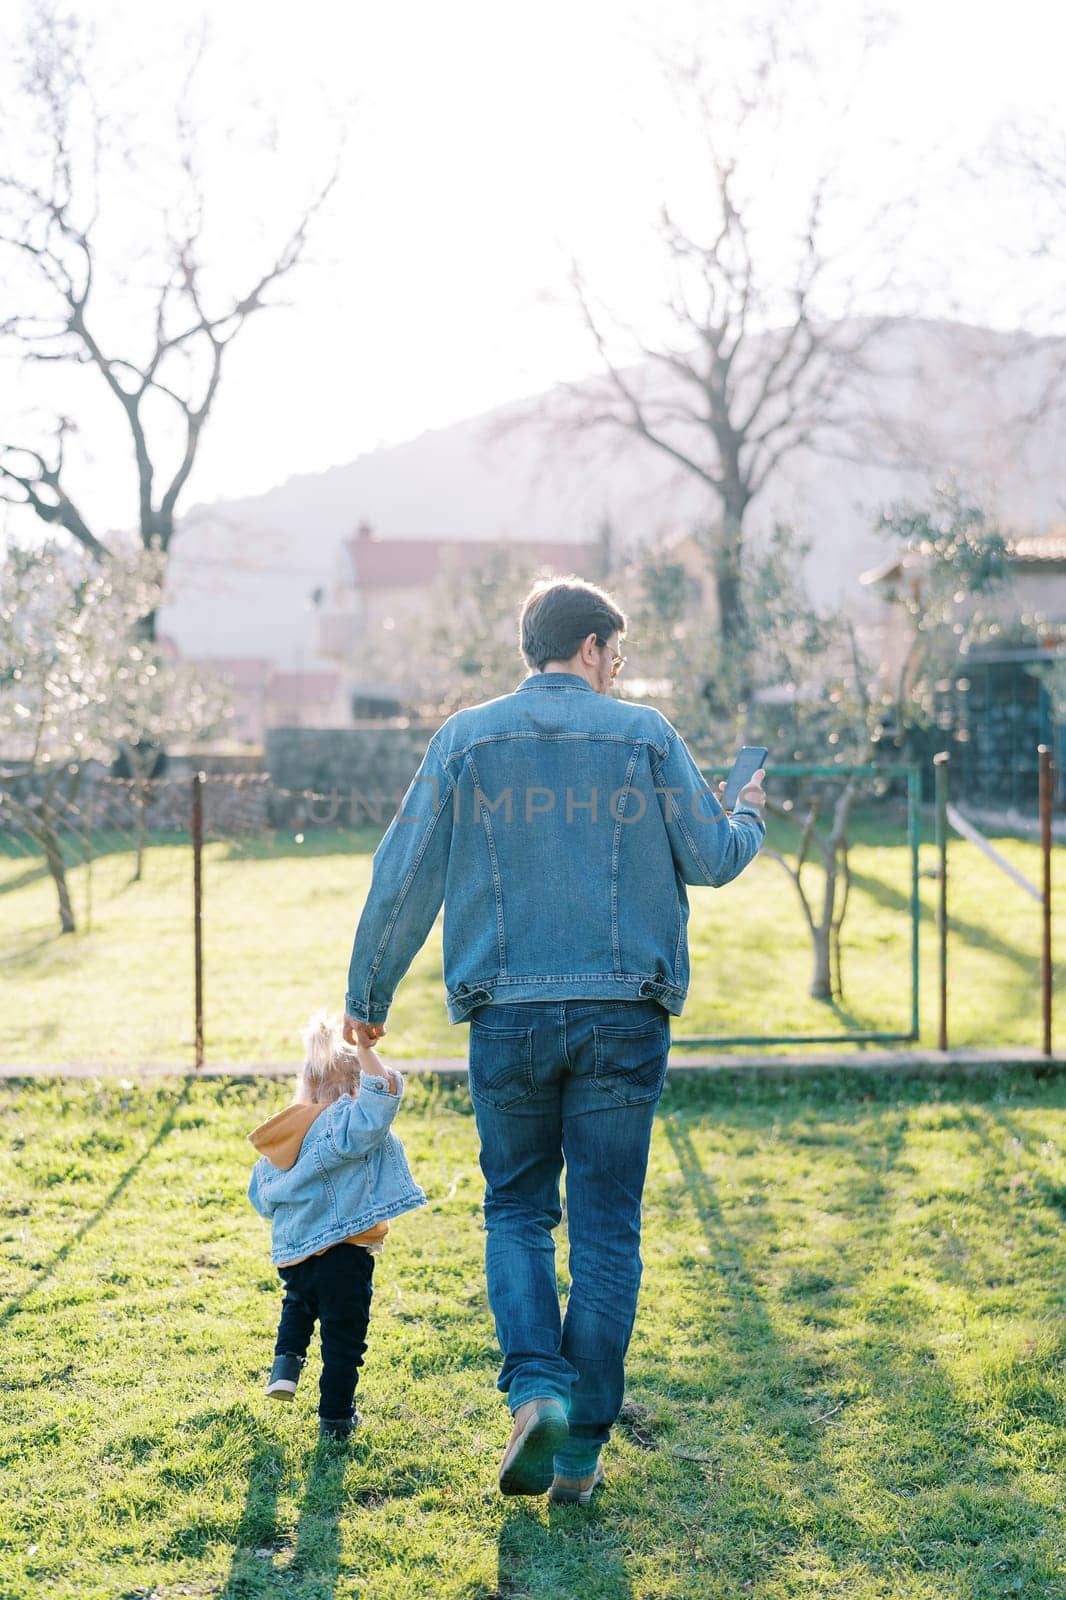 Dad leads a little girl by the hand through a green lawn to the house, looking at the phone. Back view by Nadtochiy